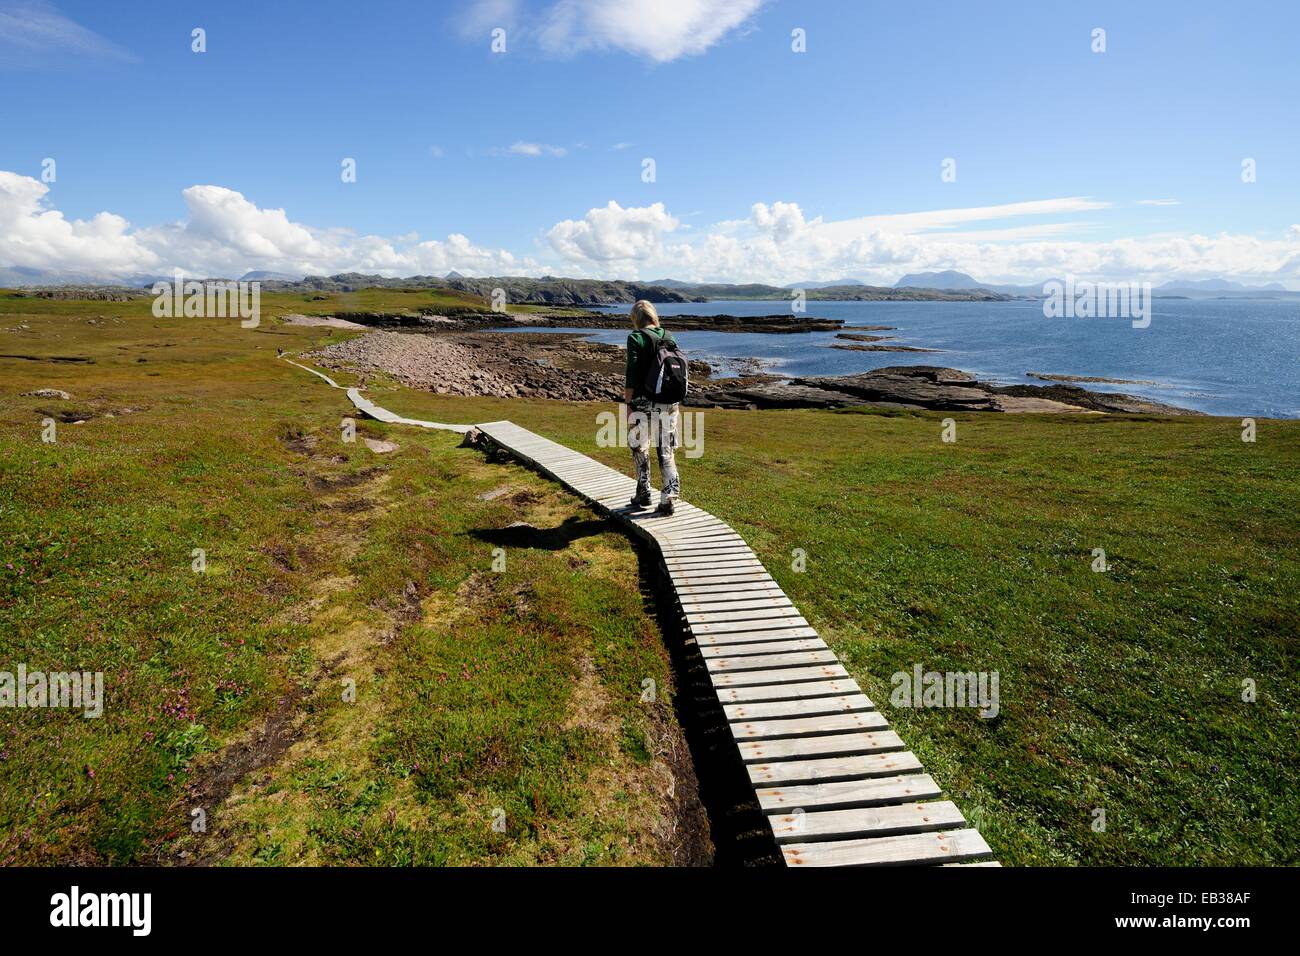 Hiker walking over a wooden boardwalk that crosses the marshy areas around the island of Handa, Scourie, Scotland Stock Photo